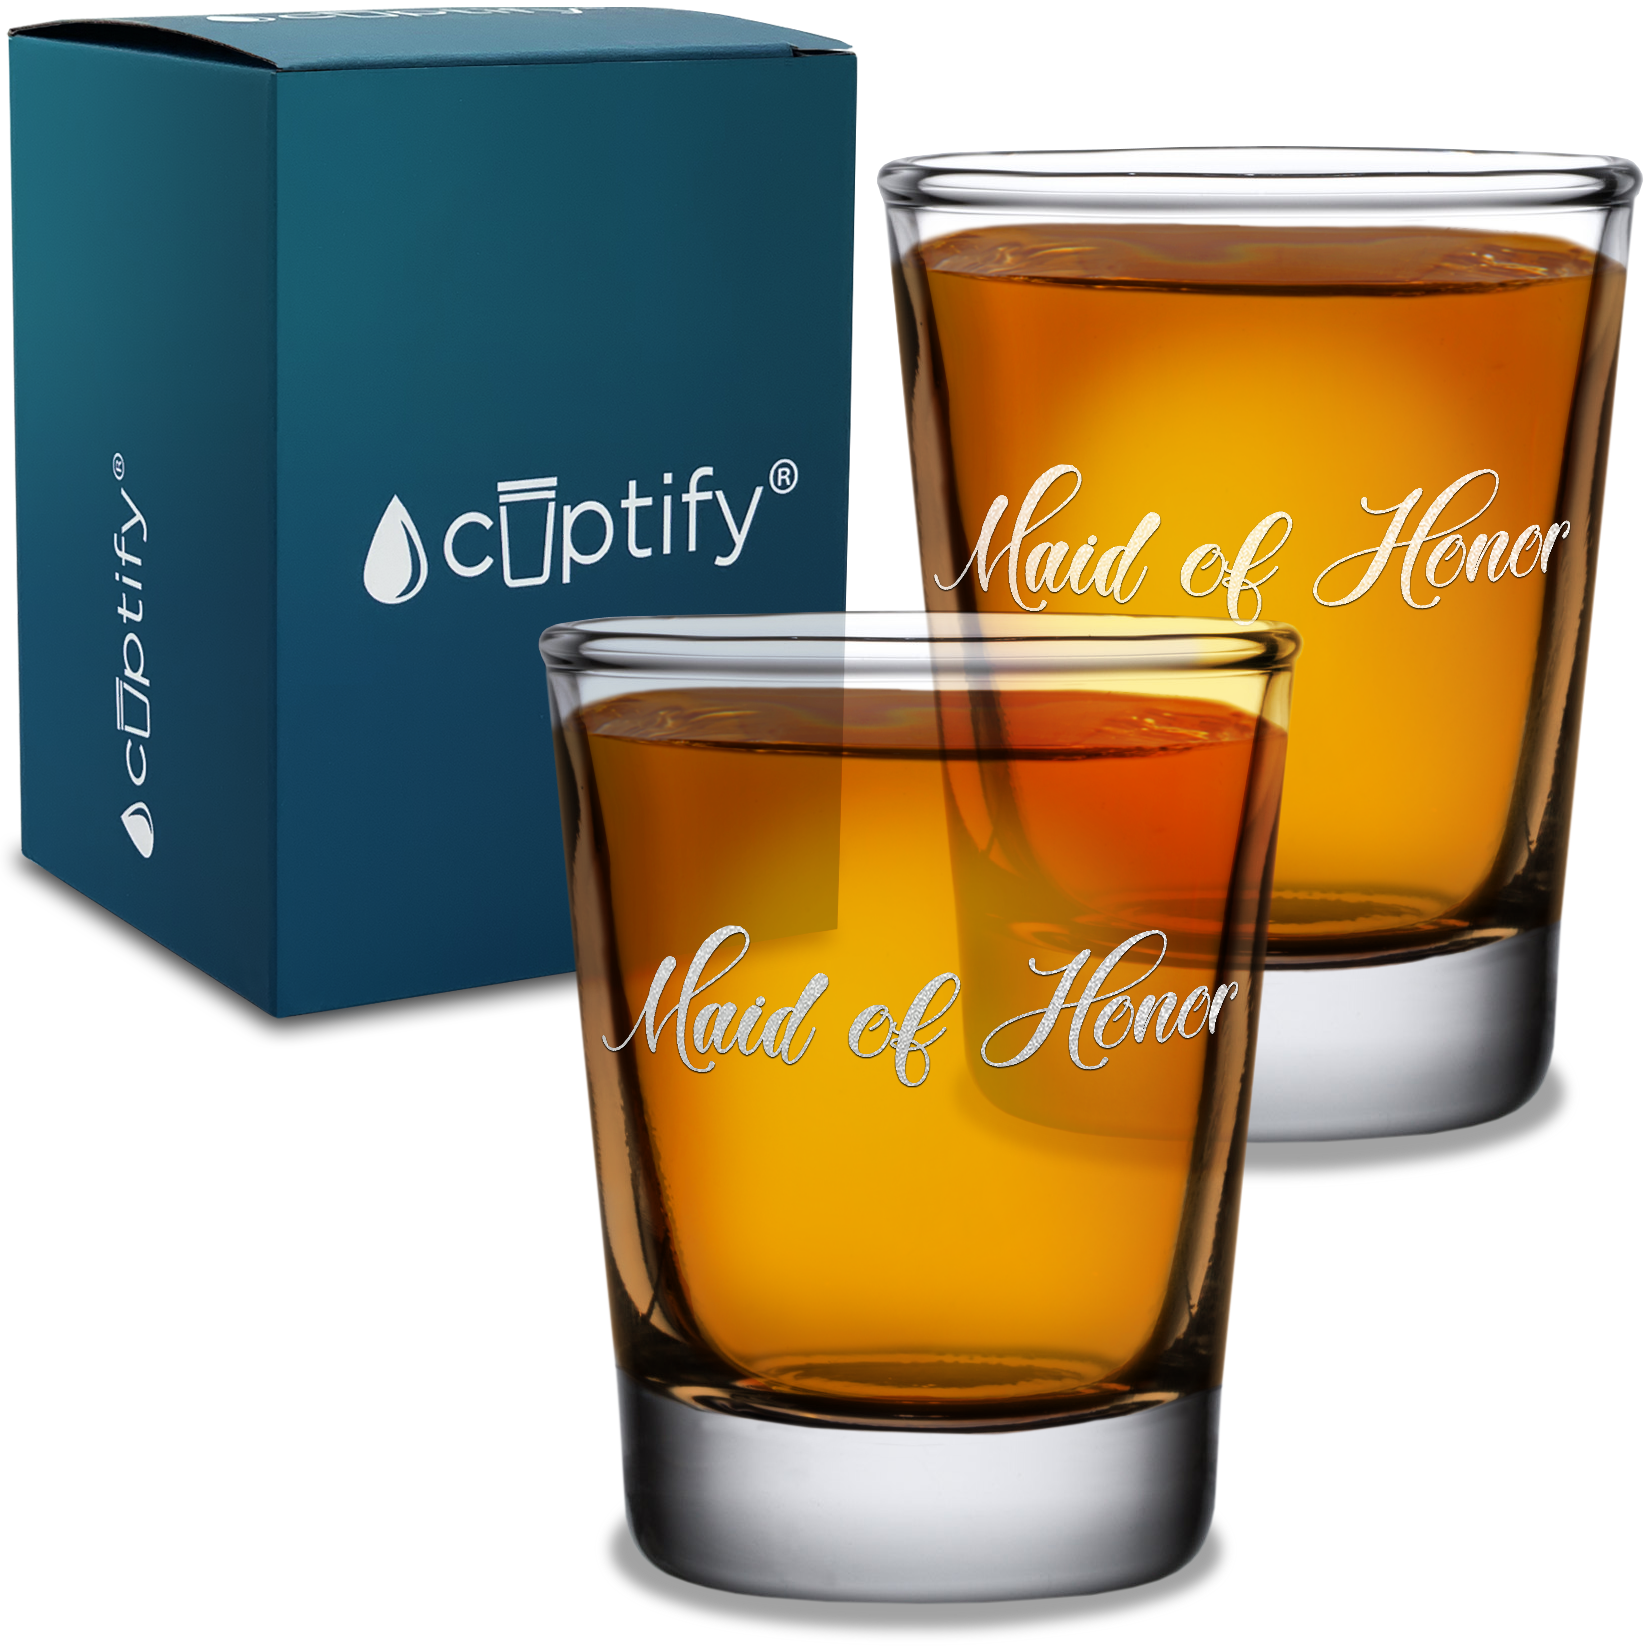  Maid Of Honor Etched on 2oz Shot Glasses - Set of 2